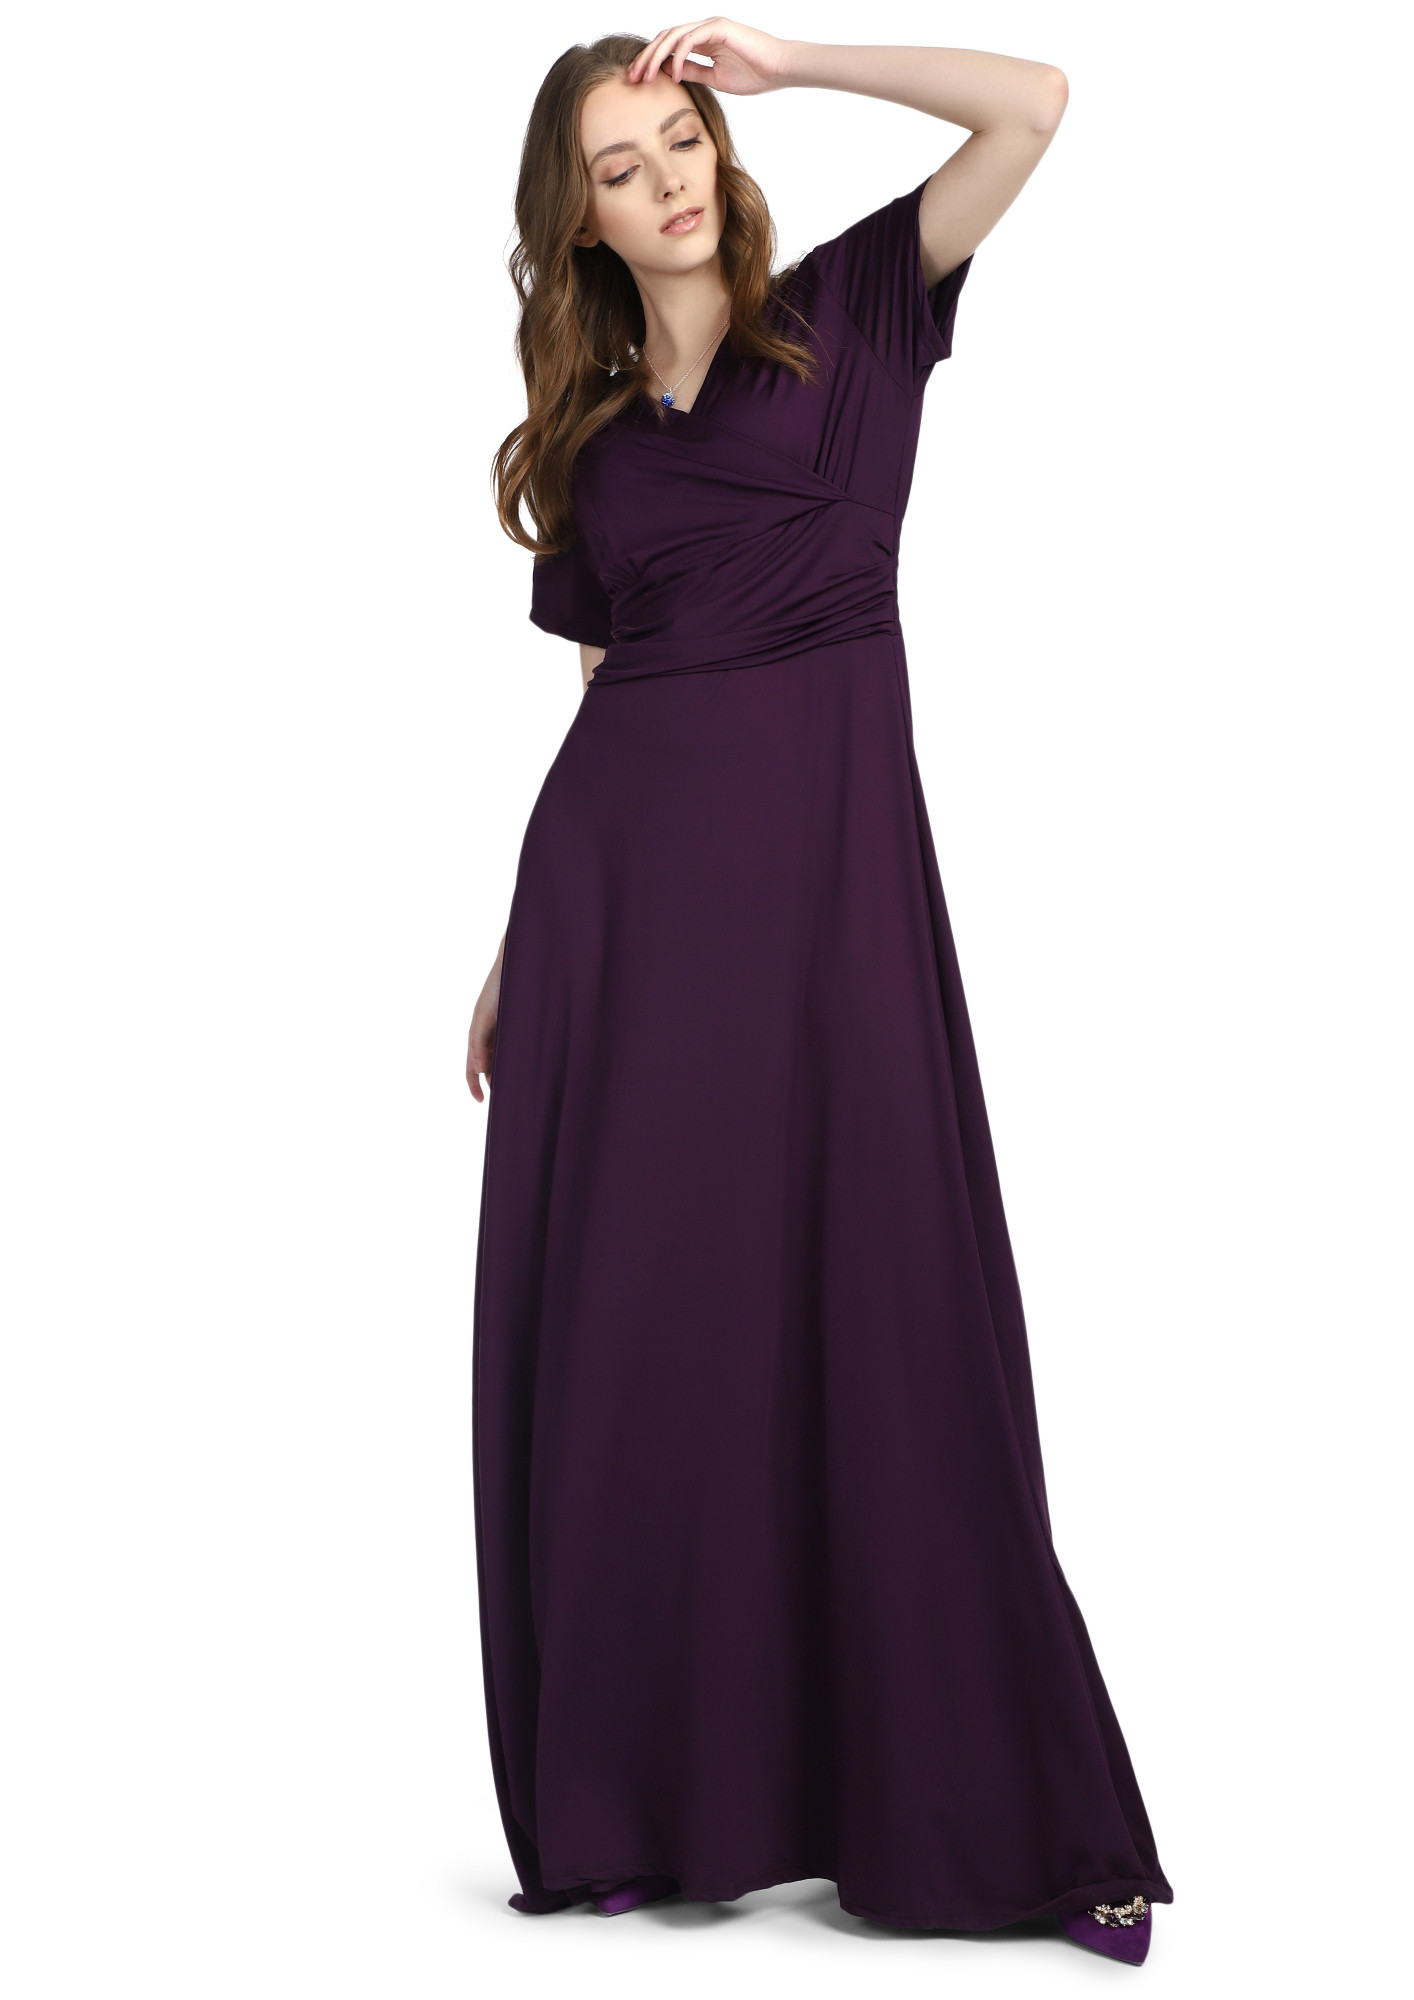 WHAT SORCERY IS THIS PURPLE MAXI DRESS